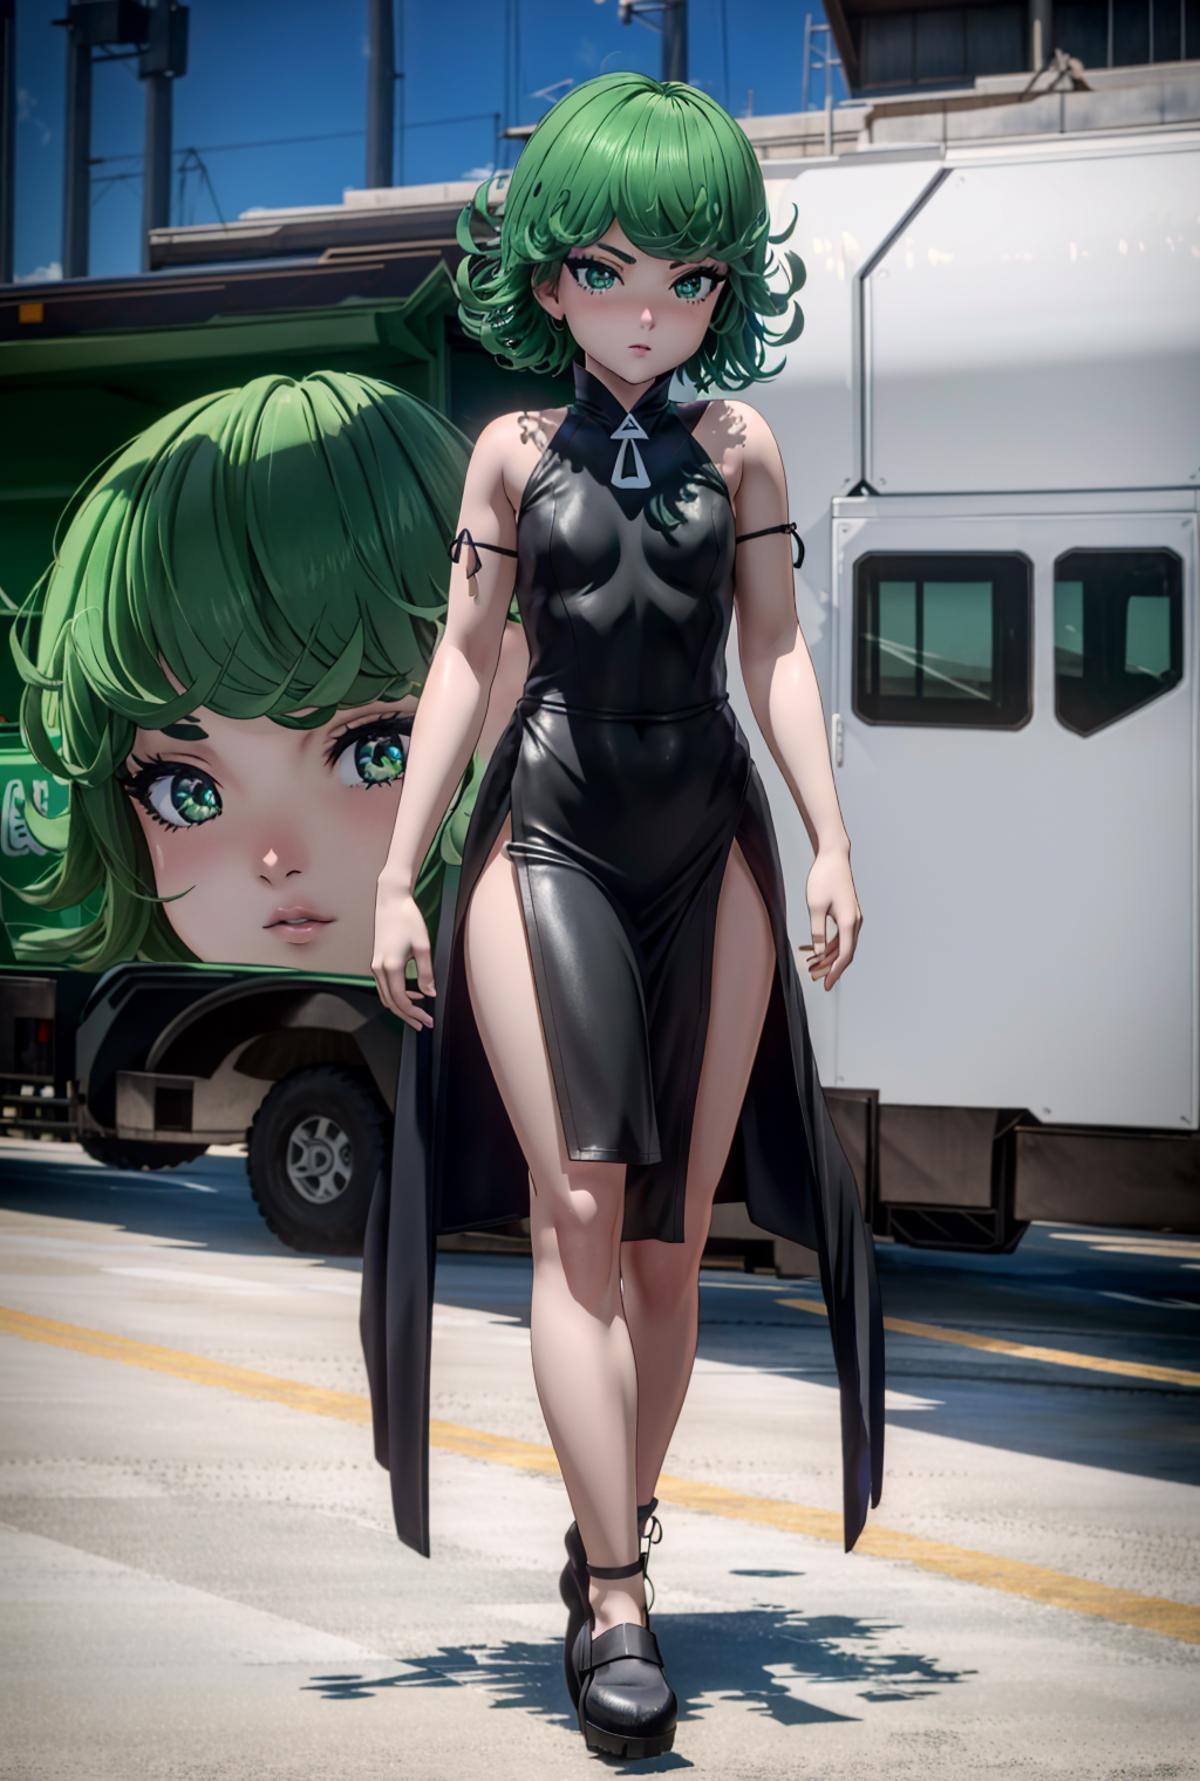 Ghost in the shell SAC 2045 Style 3D style | Lycoris image by fansay